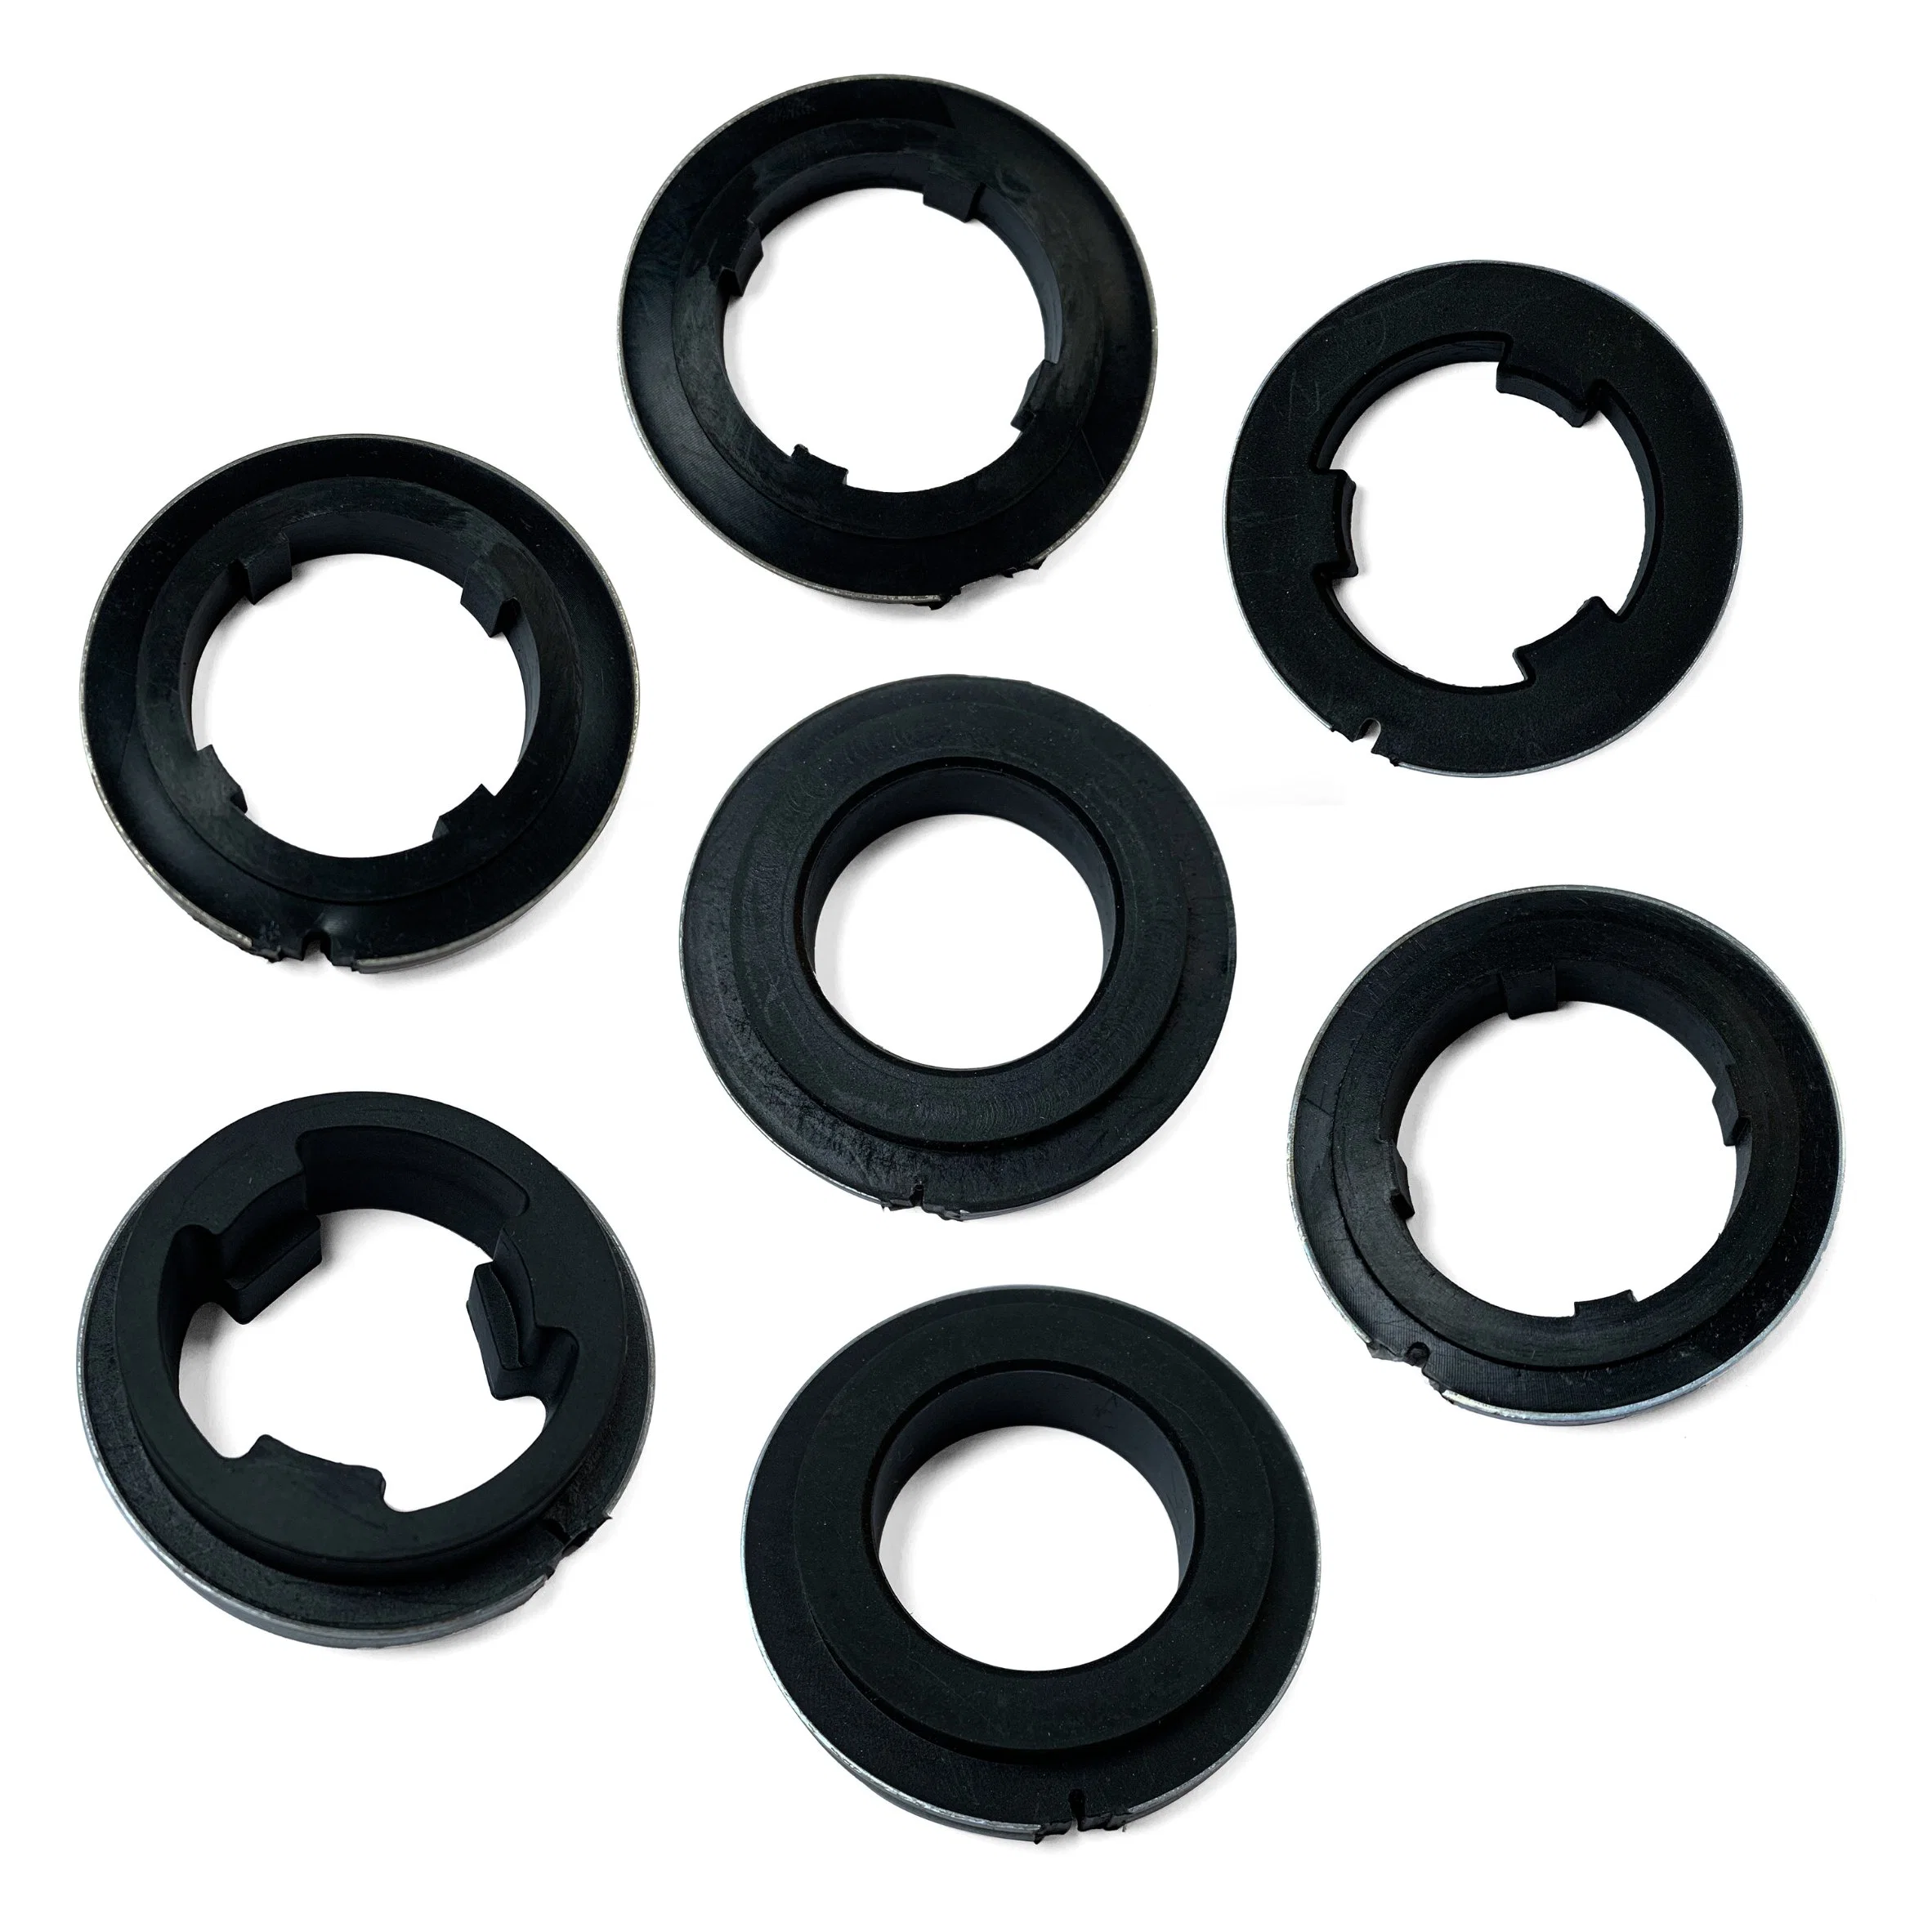 Rubber to Metal Bonded Seals for Washing Machine; Home Appliacne